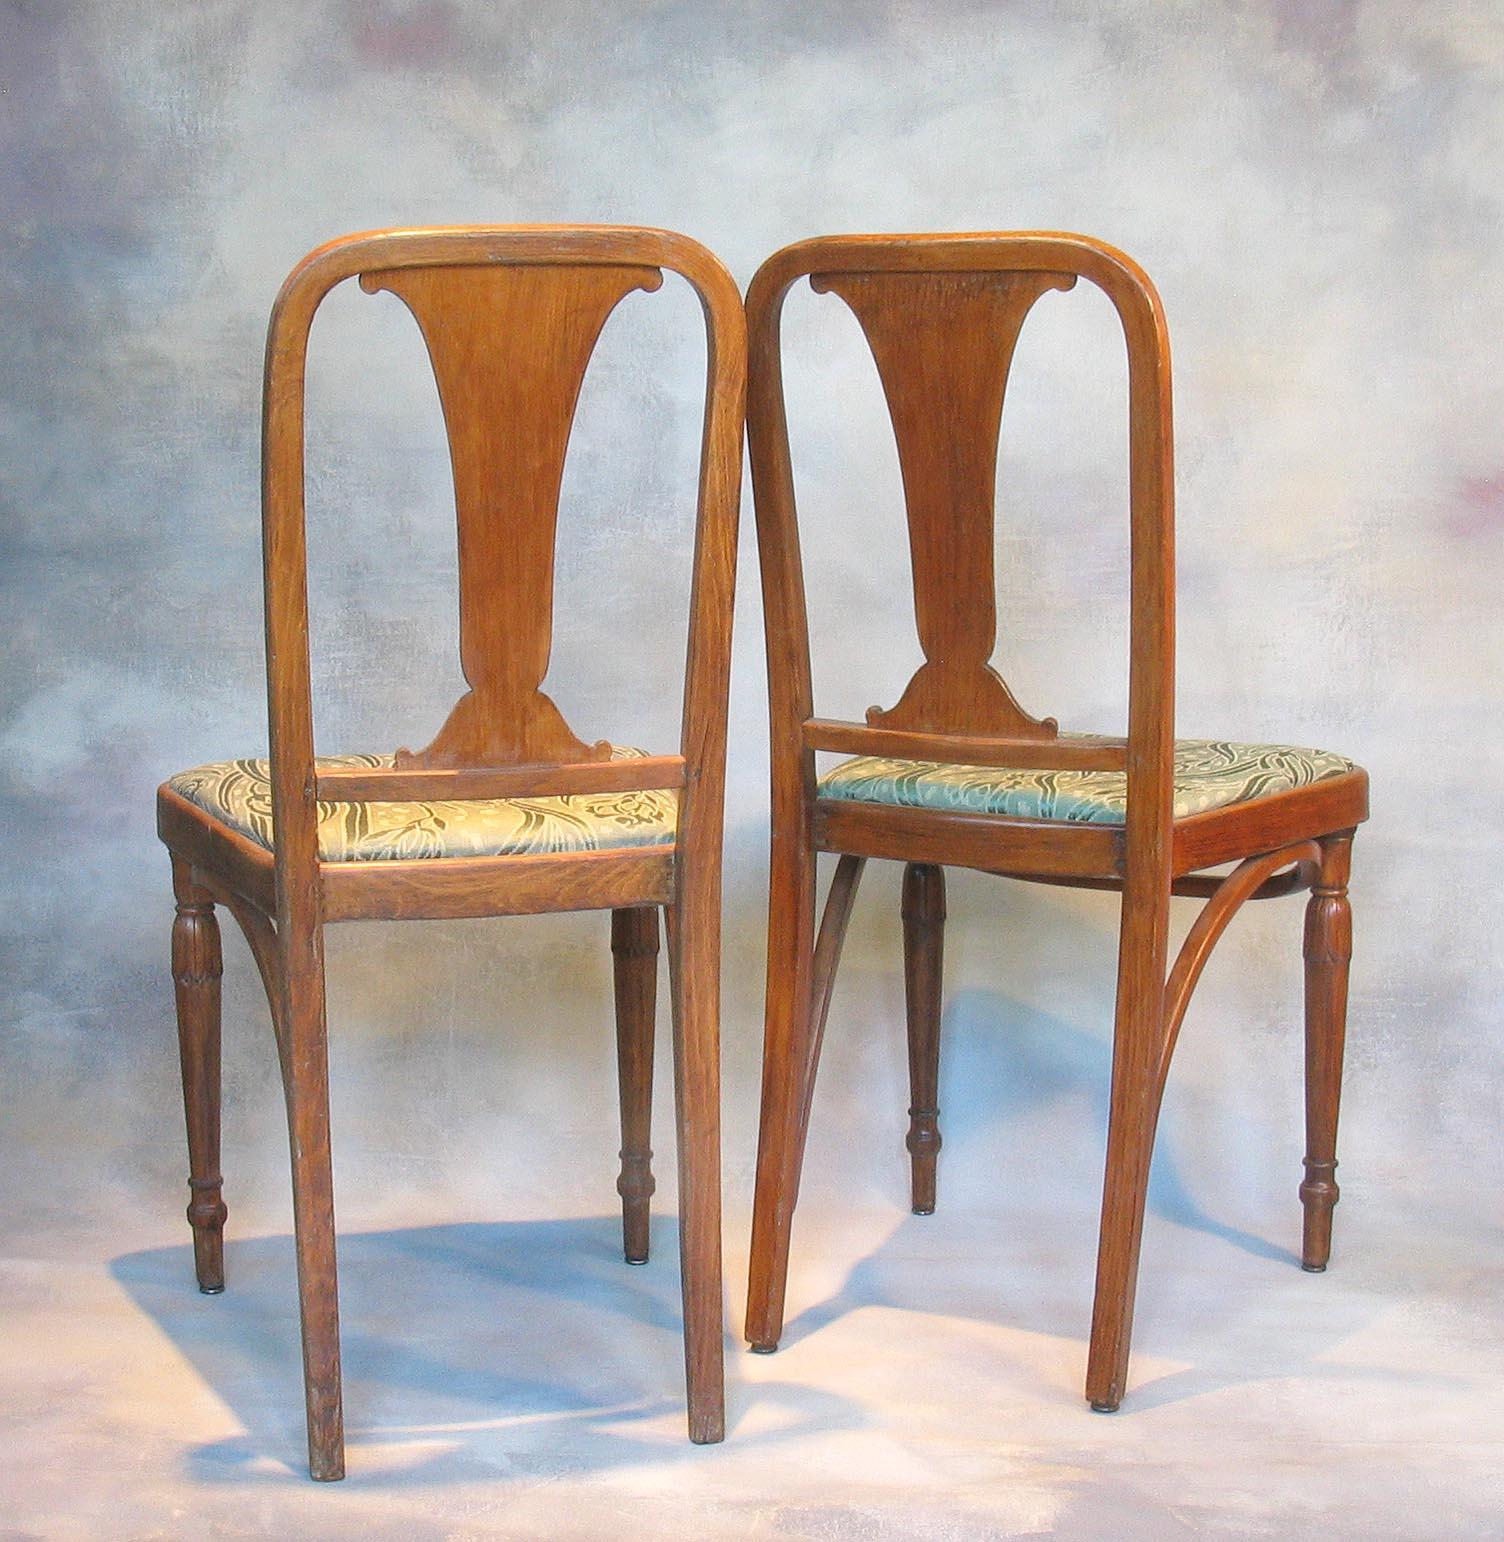 Edwardian Rare Pair of Bentwood Side Chairs by Jacob & Josef, Czechoslovakia, circa 1920 For Sale